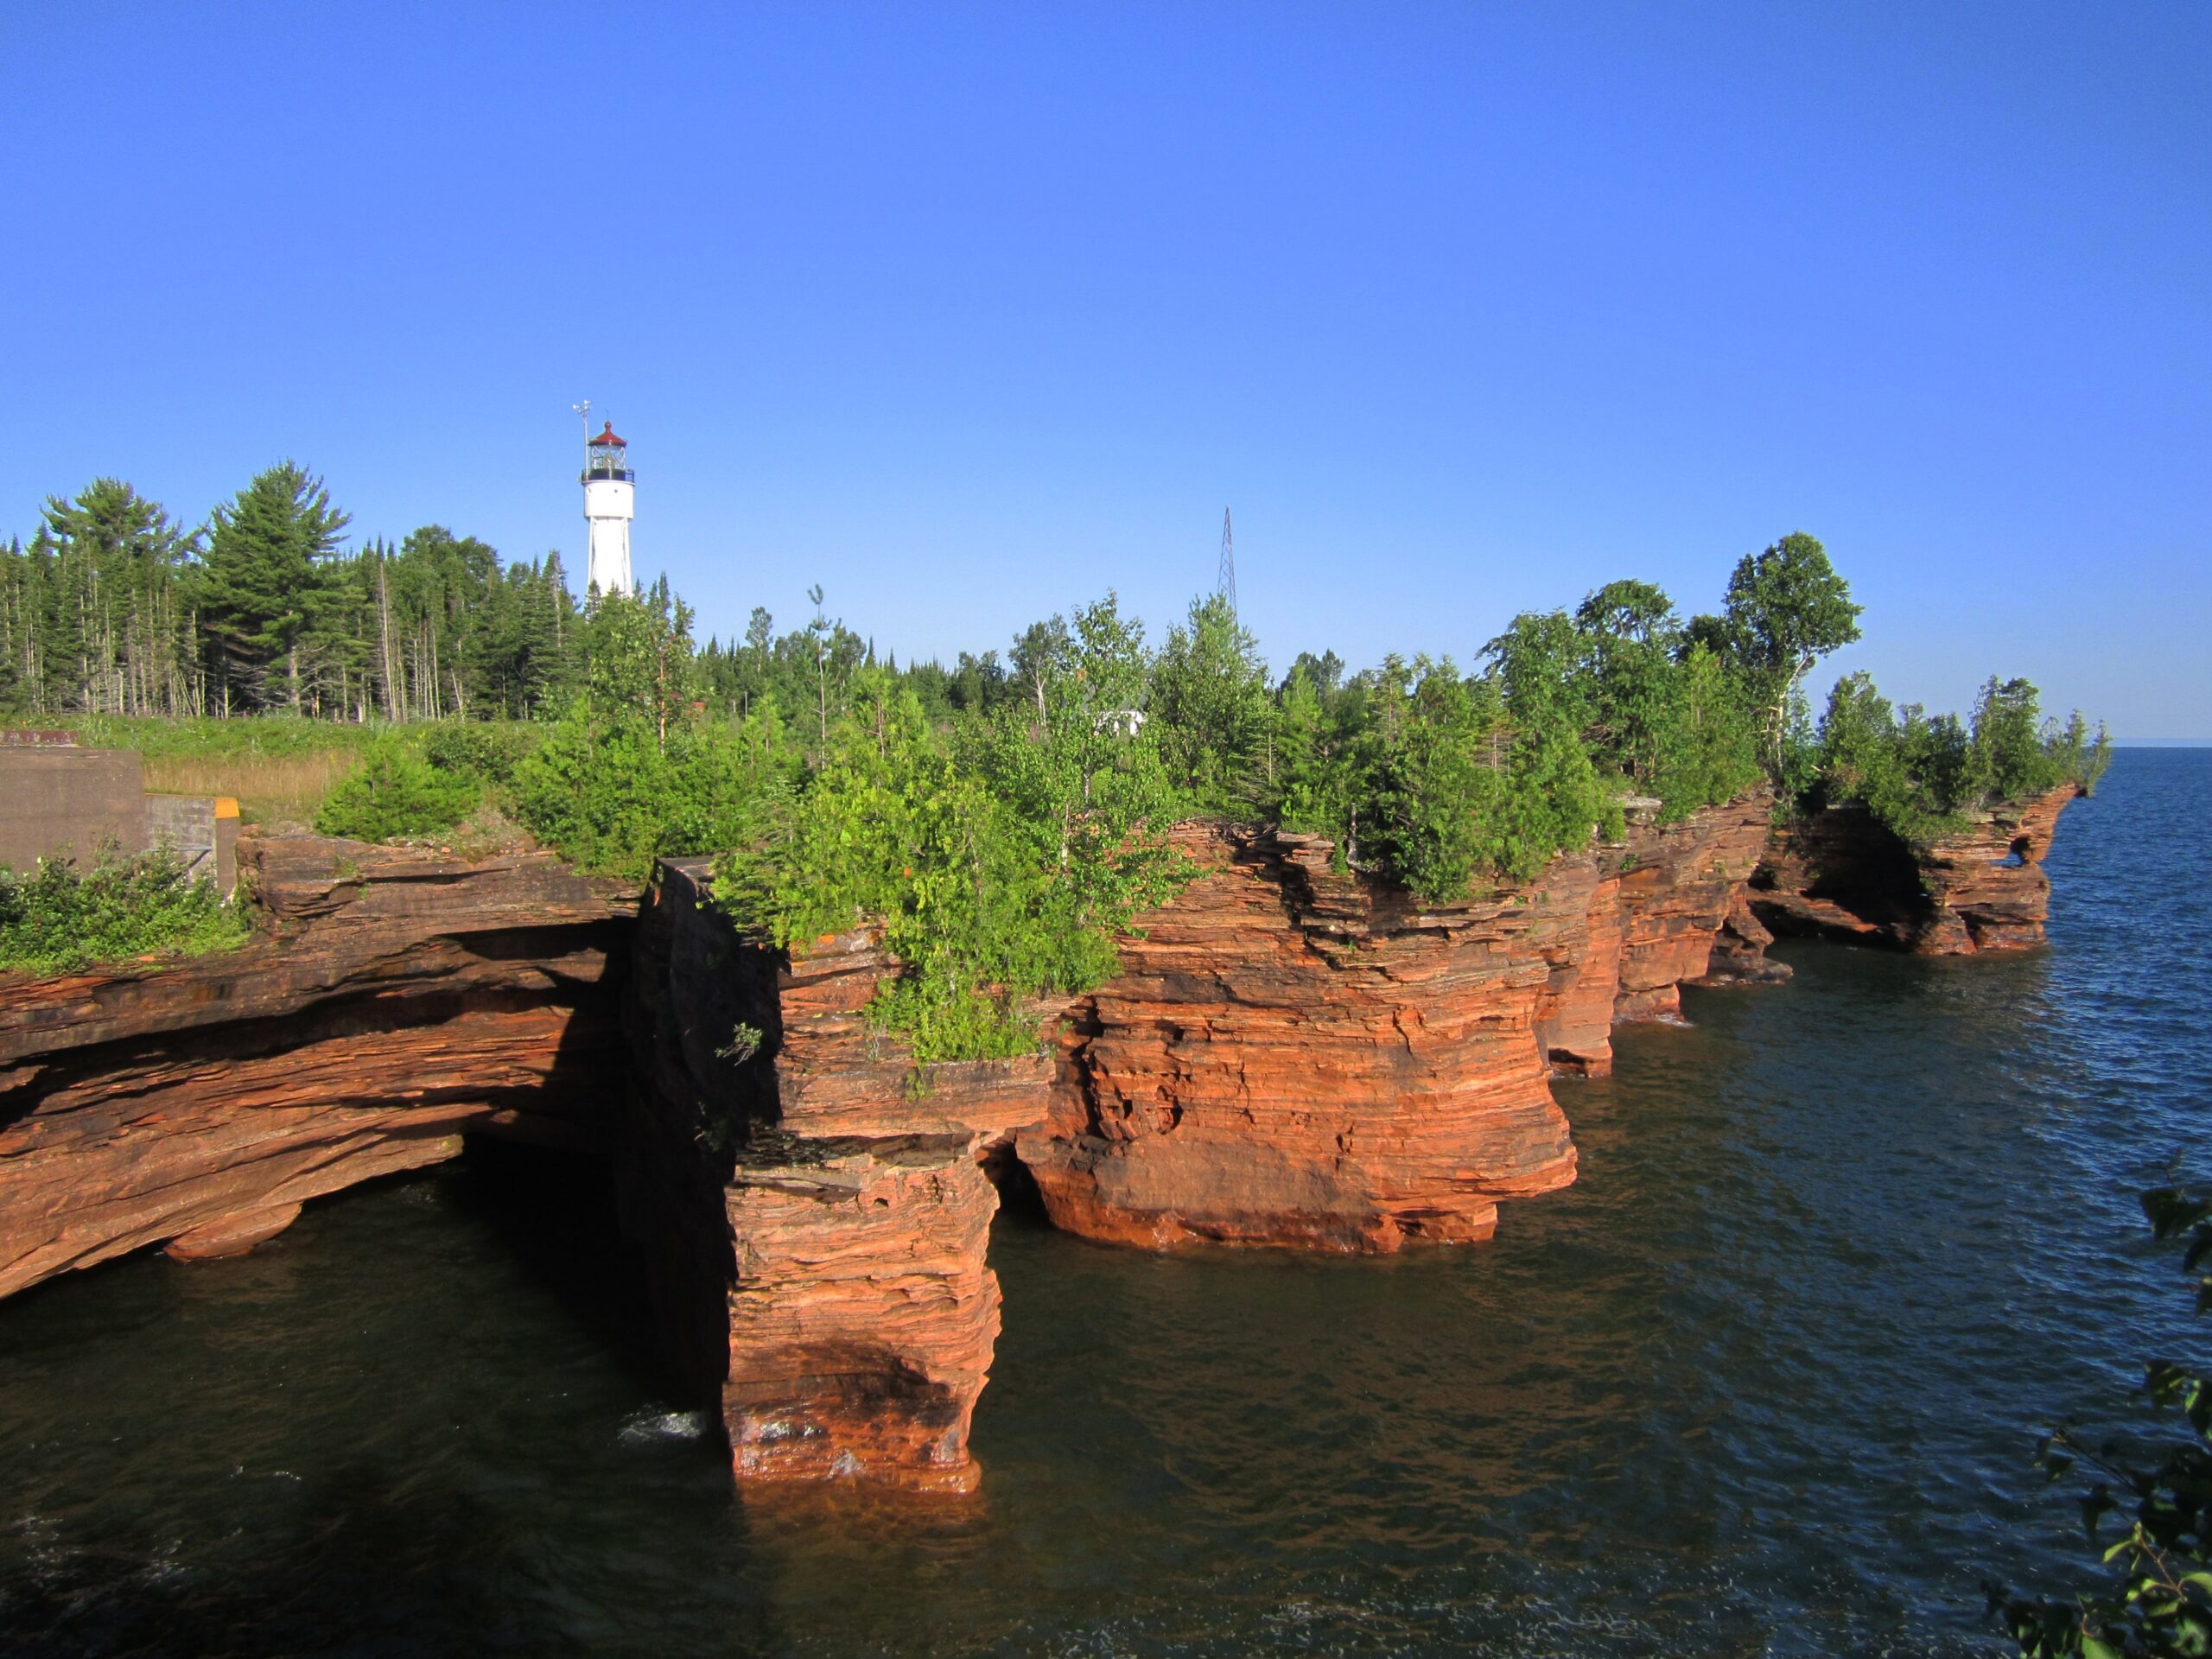 A View Of The Devils Island Light within the Apostle Islands National Lakeshore